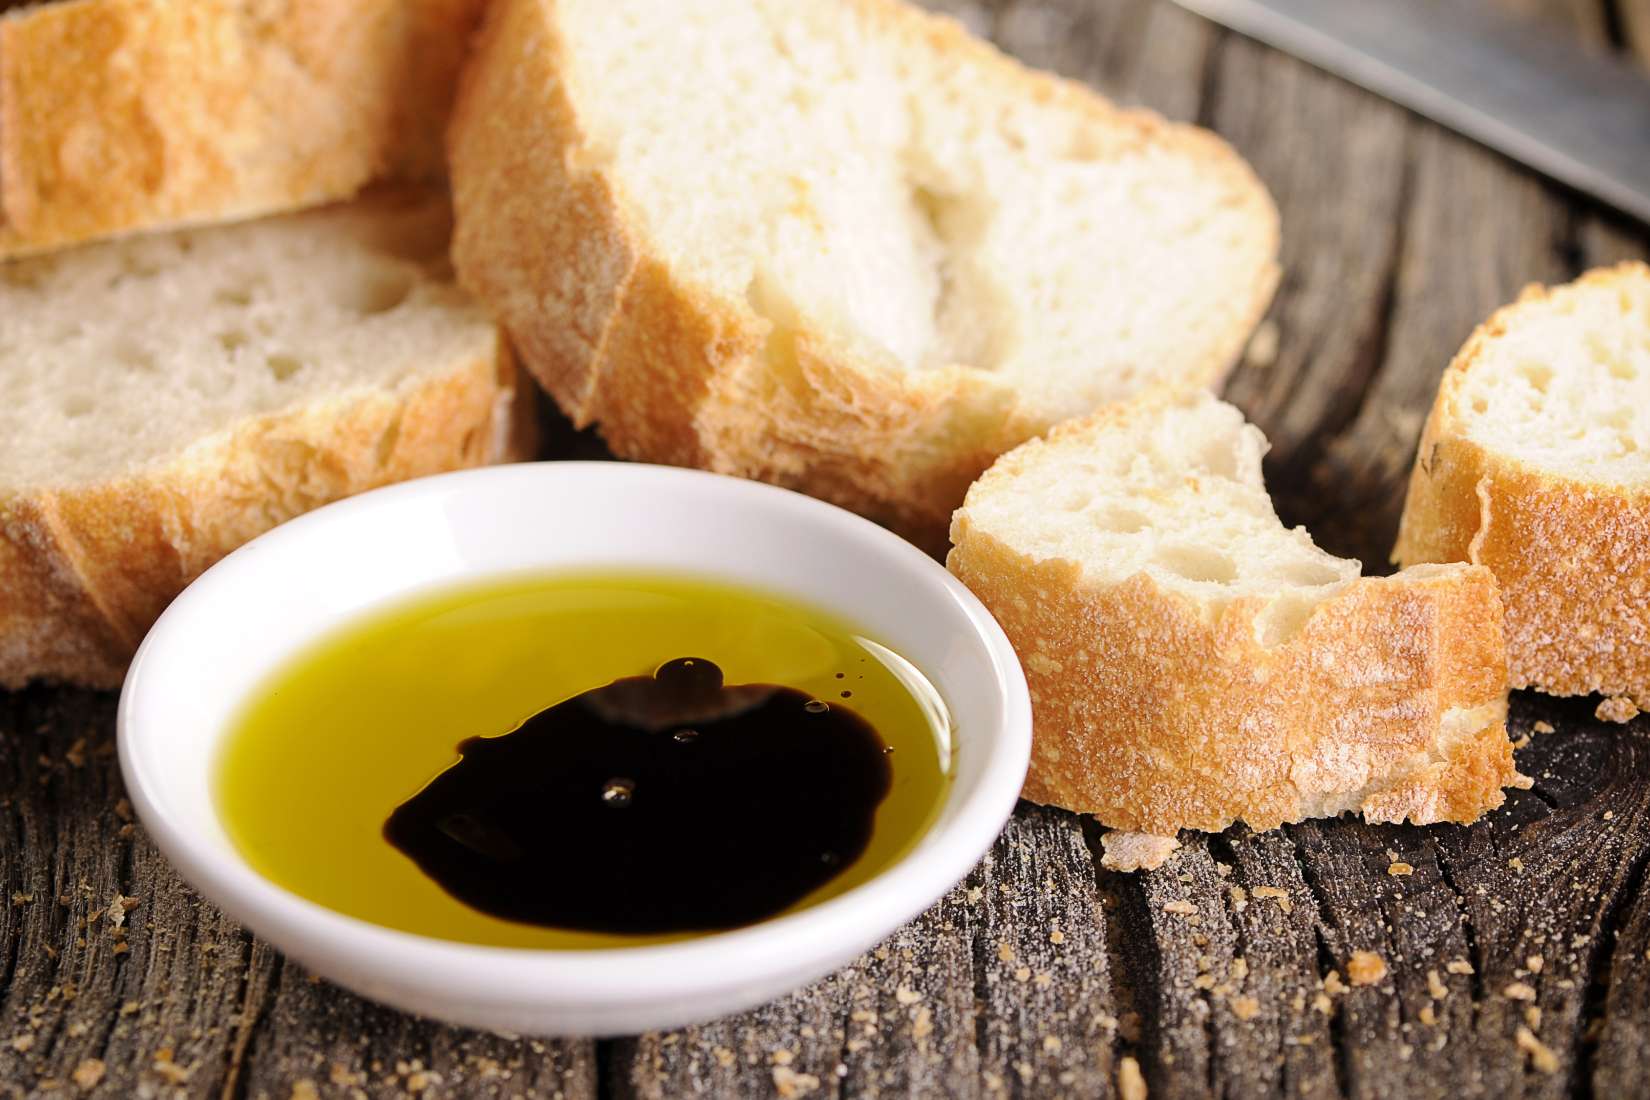 Balsamic vinegar and olive oil and bread